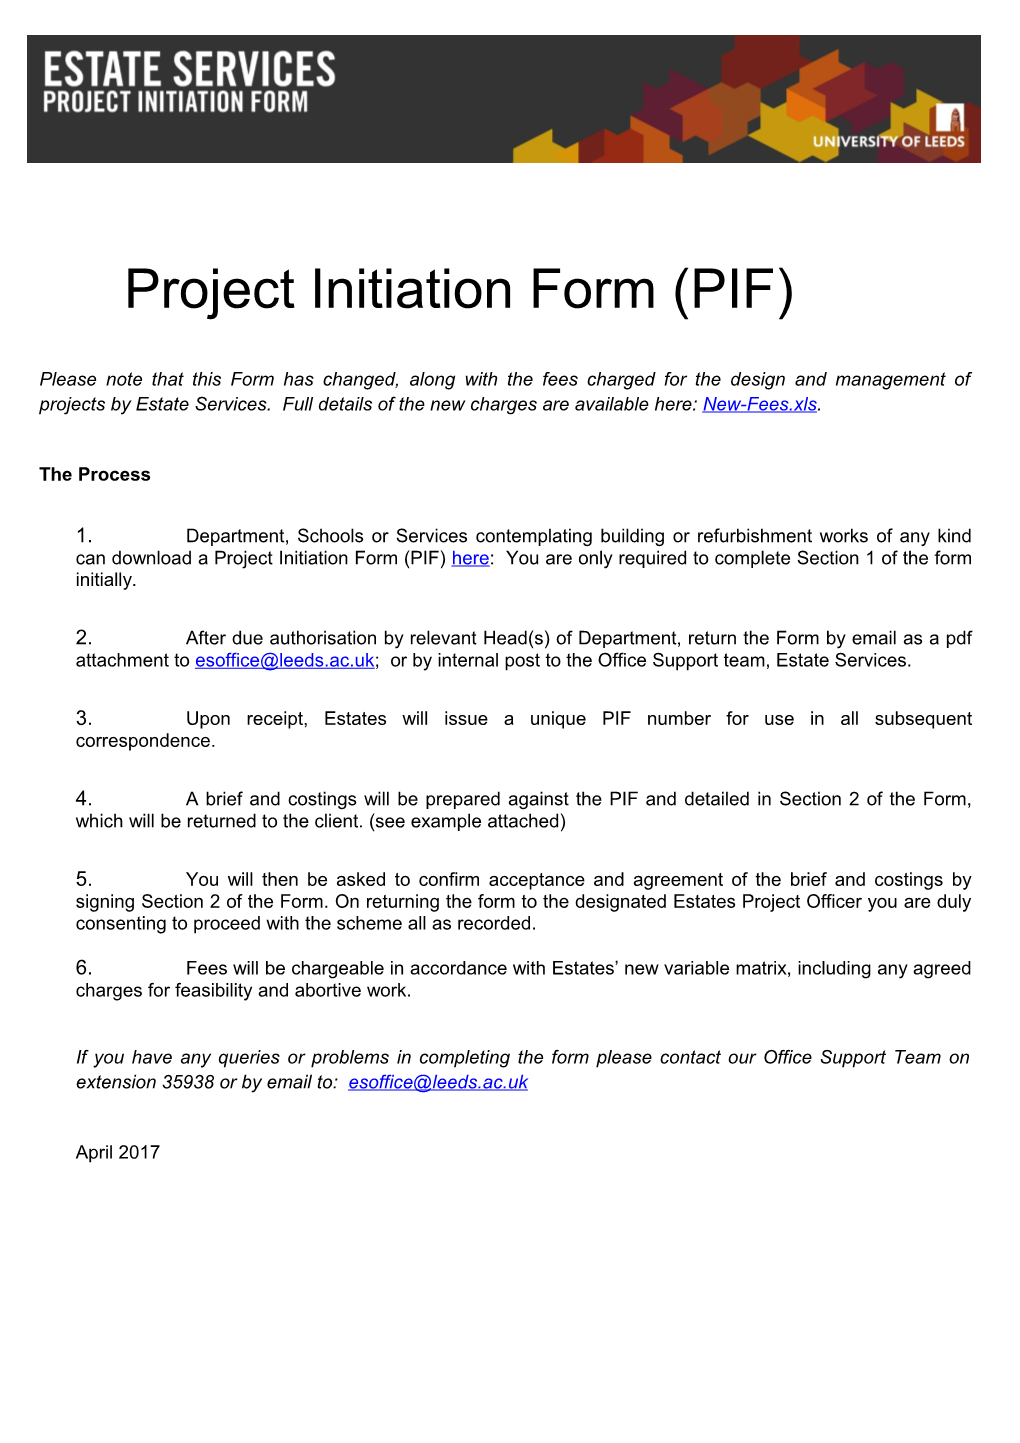 Project Initiation Form (PIF)